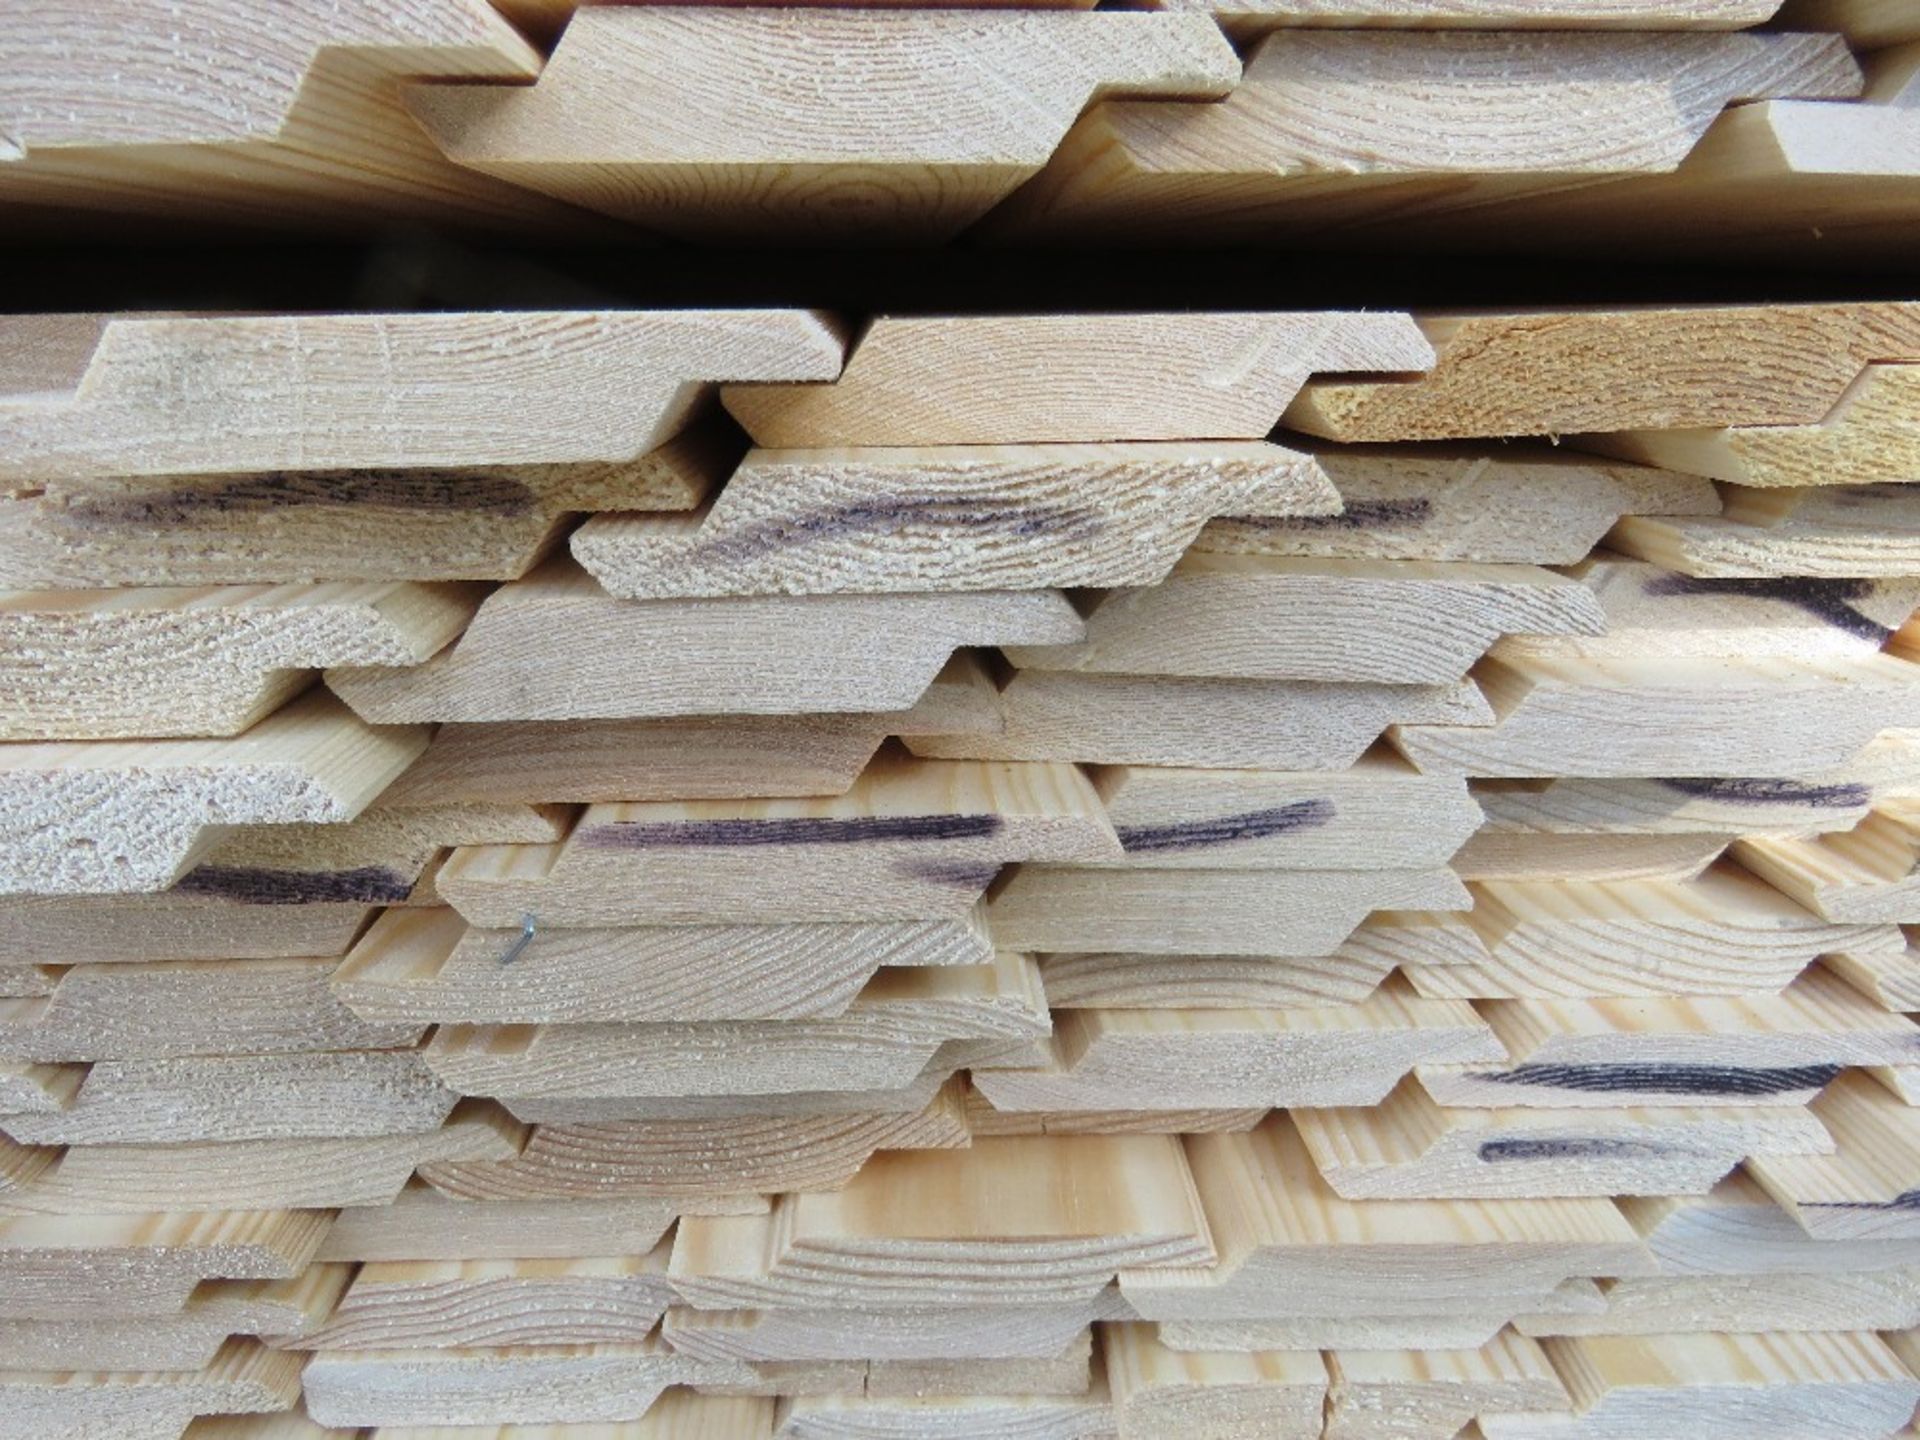 PACK OF UNTREATED SHIPLAP TIMBER CLADDING BOARDS @ 1.73M LENGTH APPROX. - Image 3 of 3